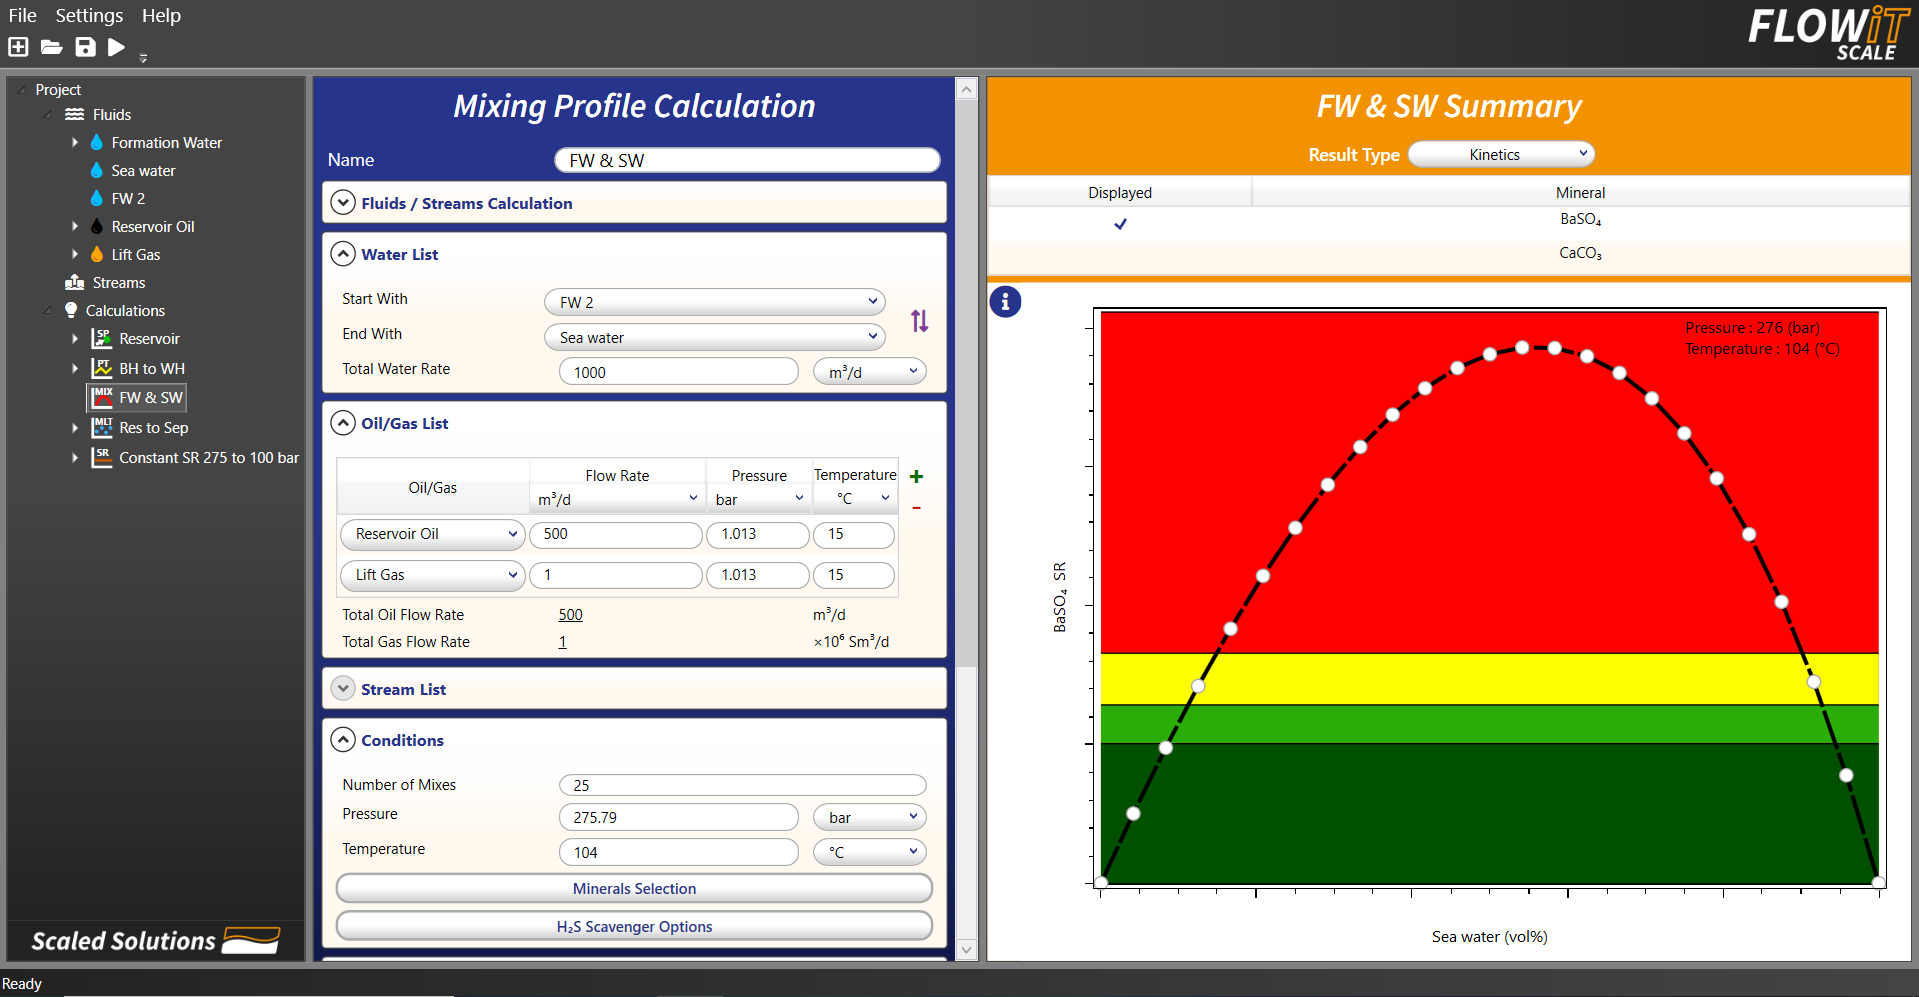 FlowiT Scale Mixing Profile Calculation with Kinetic View